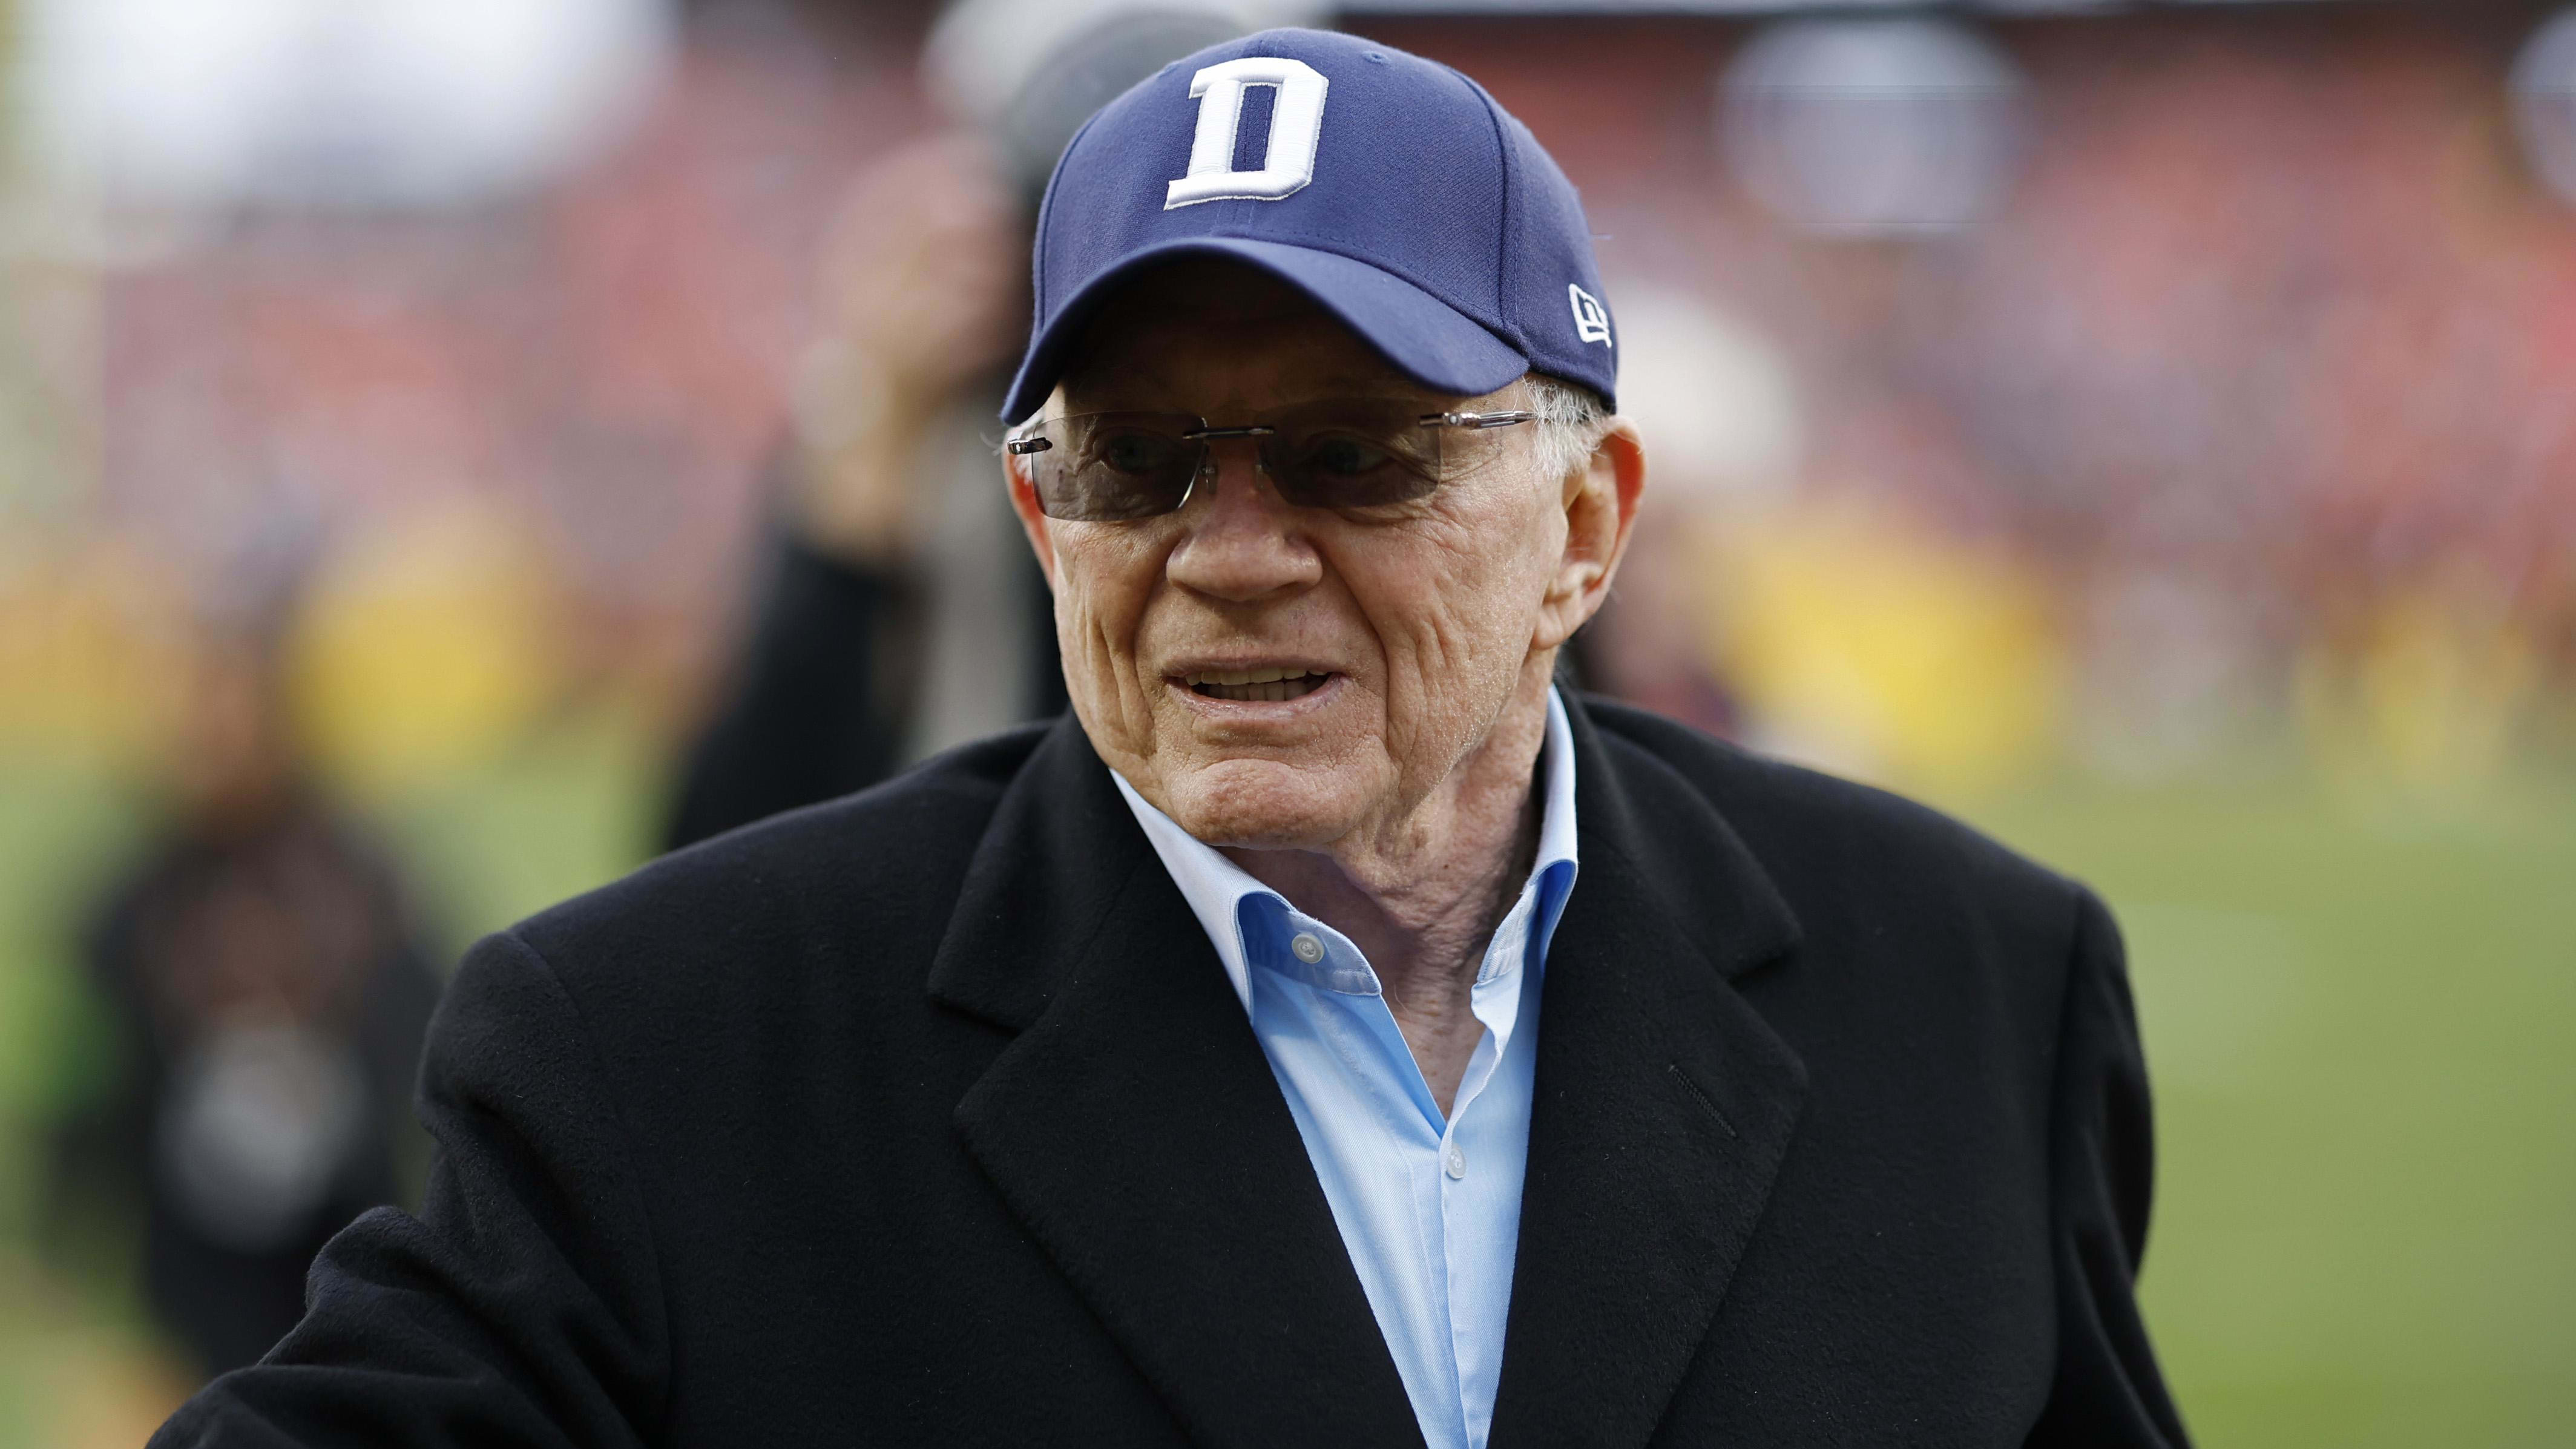 Jerry Jones, Owner of the Dallas Cowboys, Does Not Top Forbes’ Ranking of Richest People in Sports